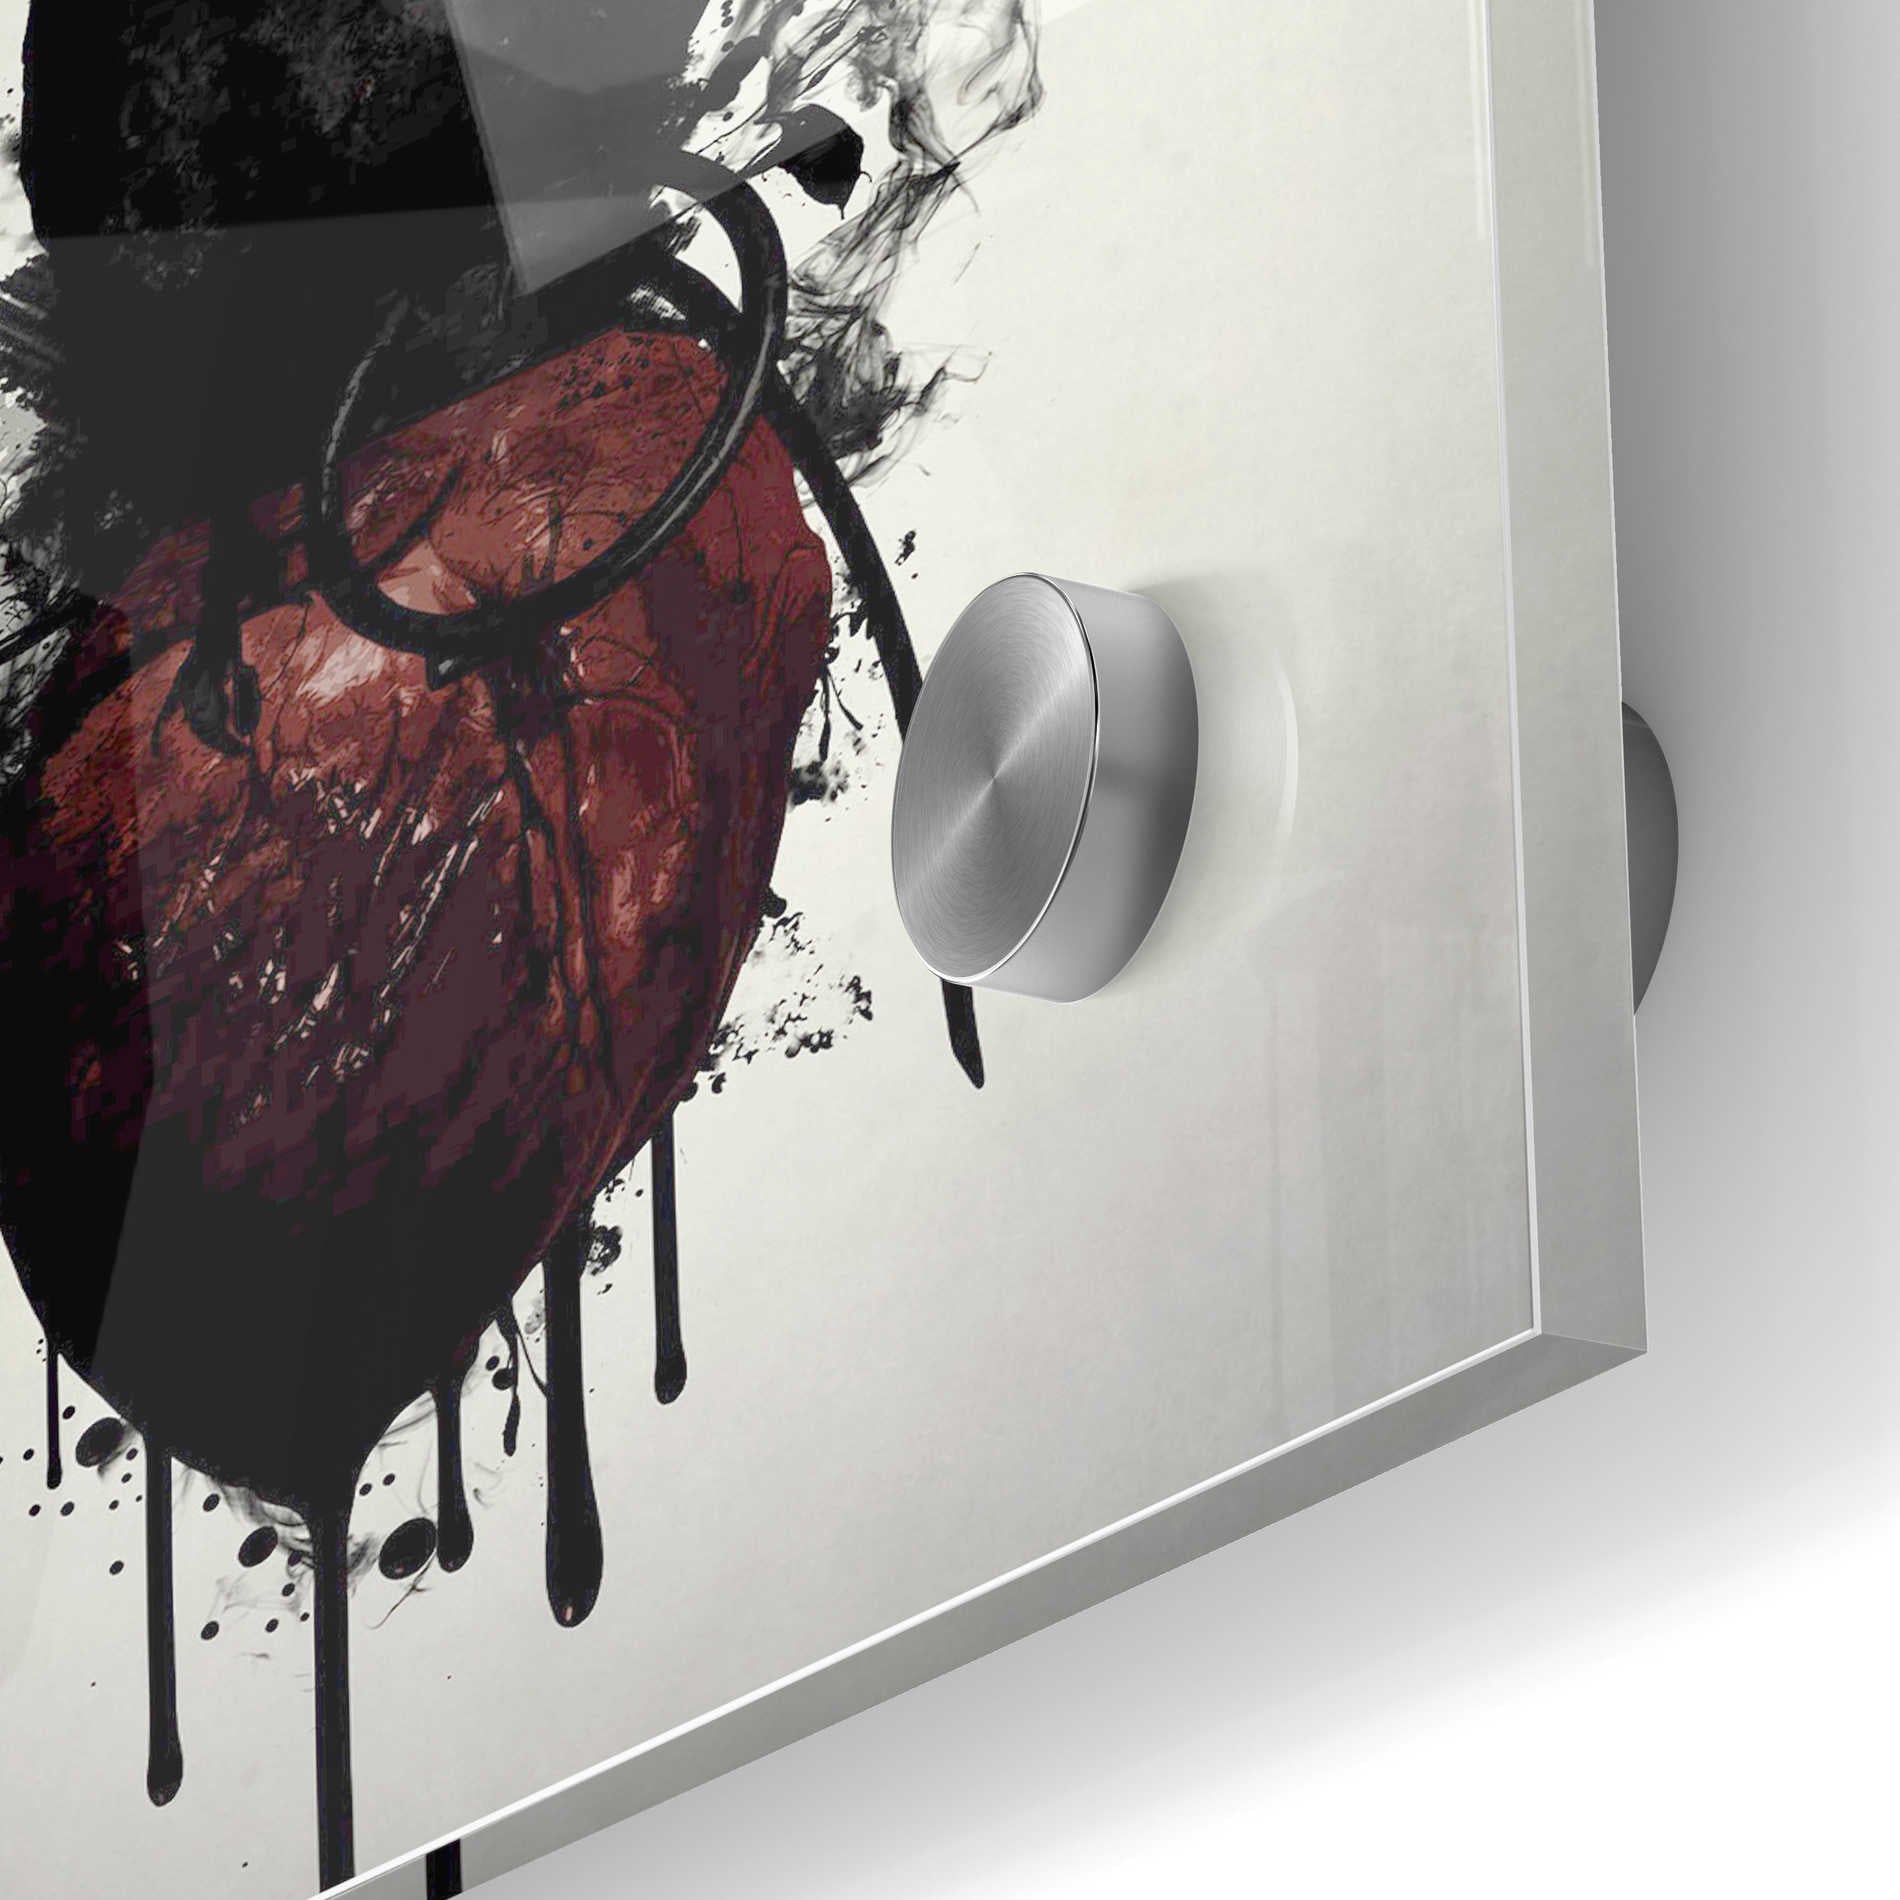 Epic Art 'Raven and Heart Grenade' by Nicklas Gustafsson, Acrylic Glass Wall Art,24x36